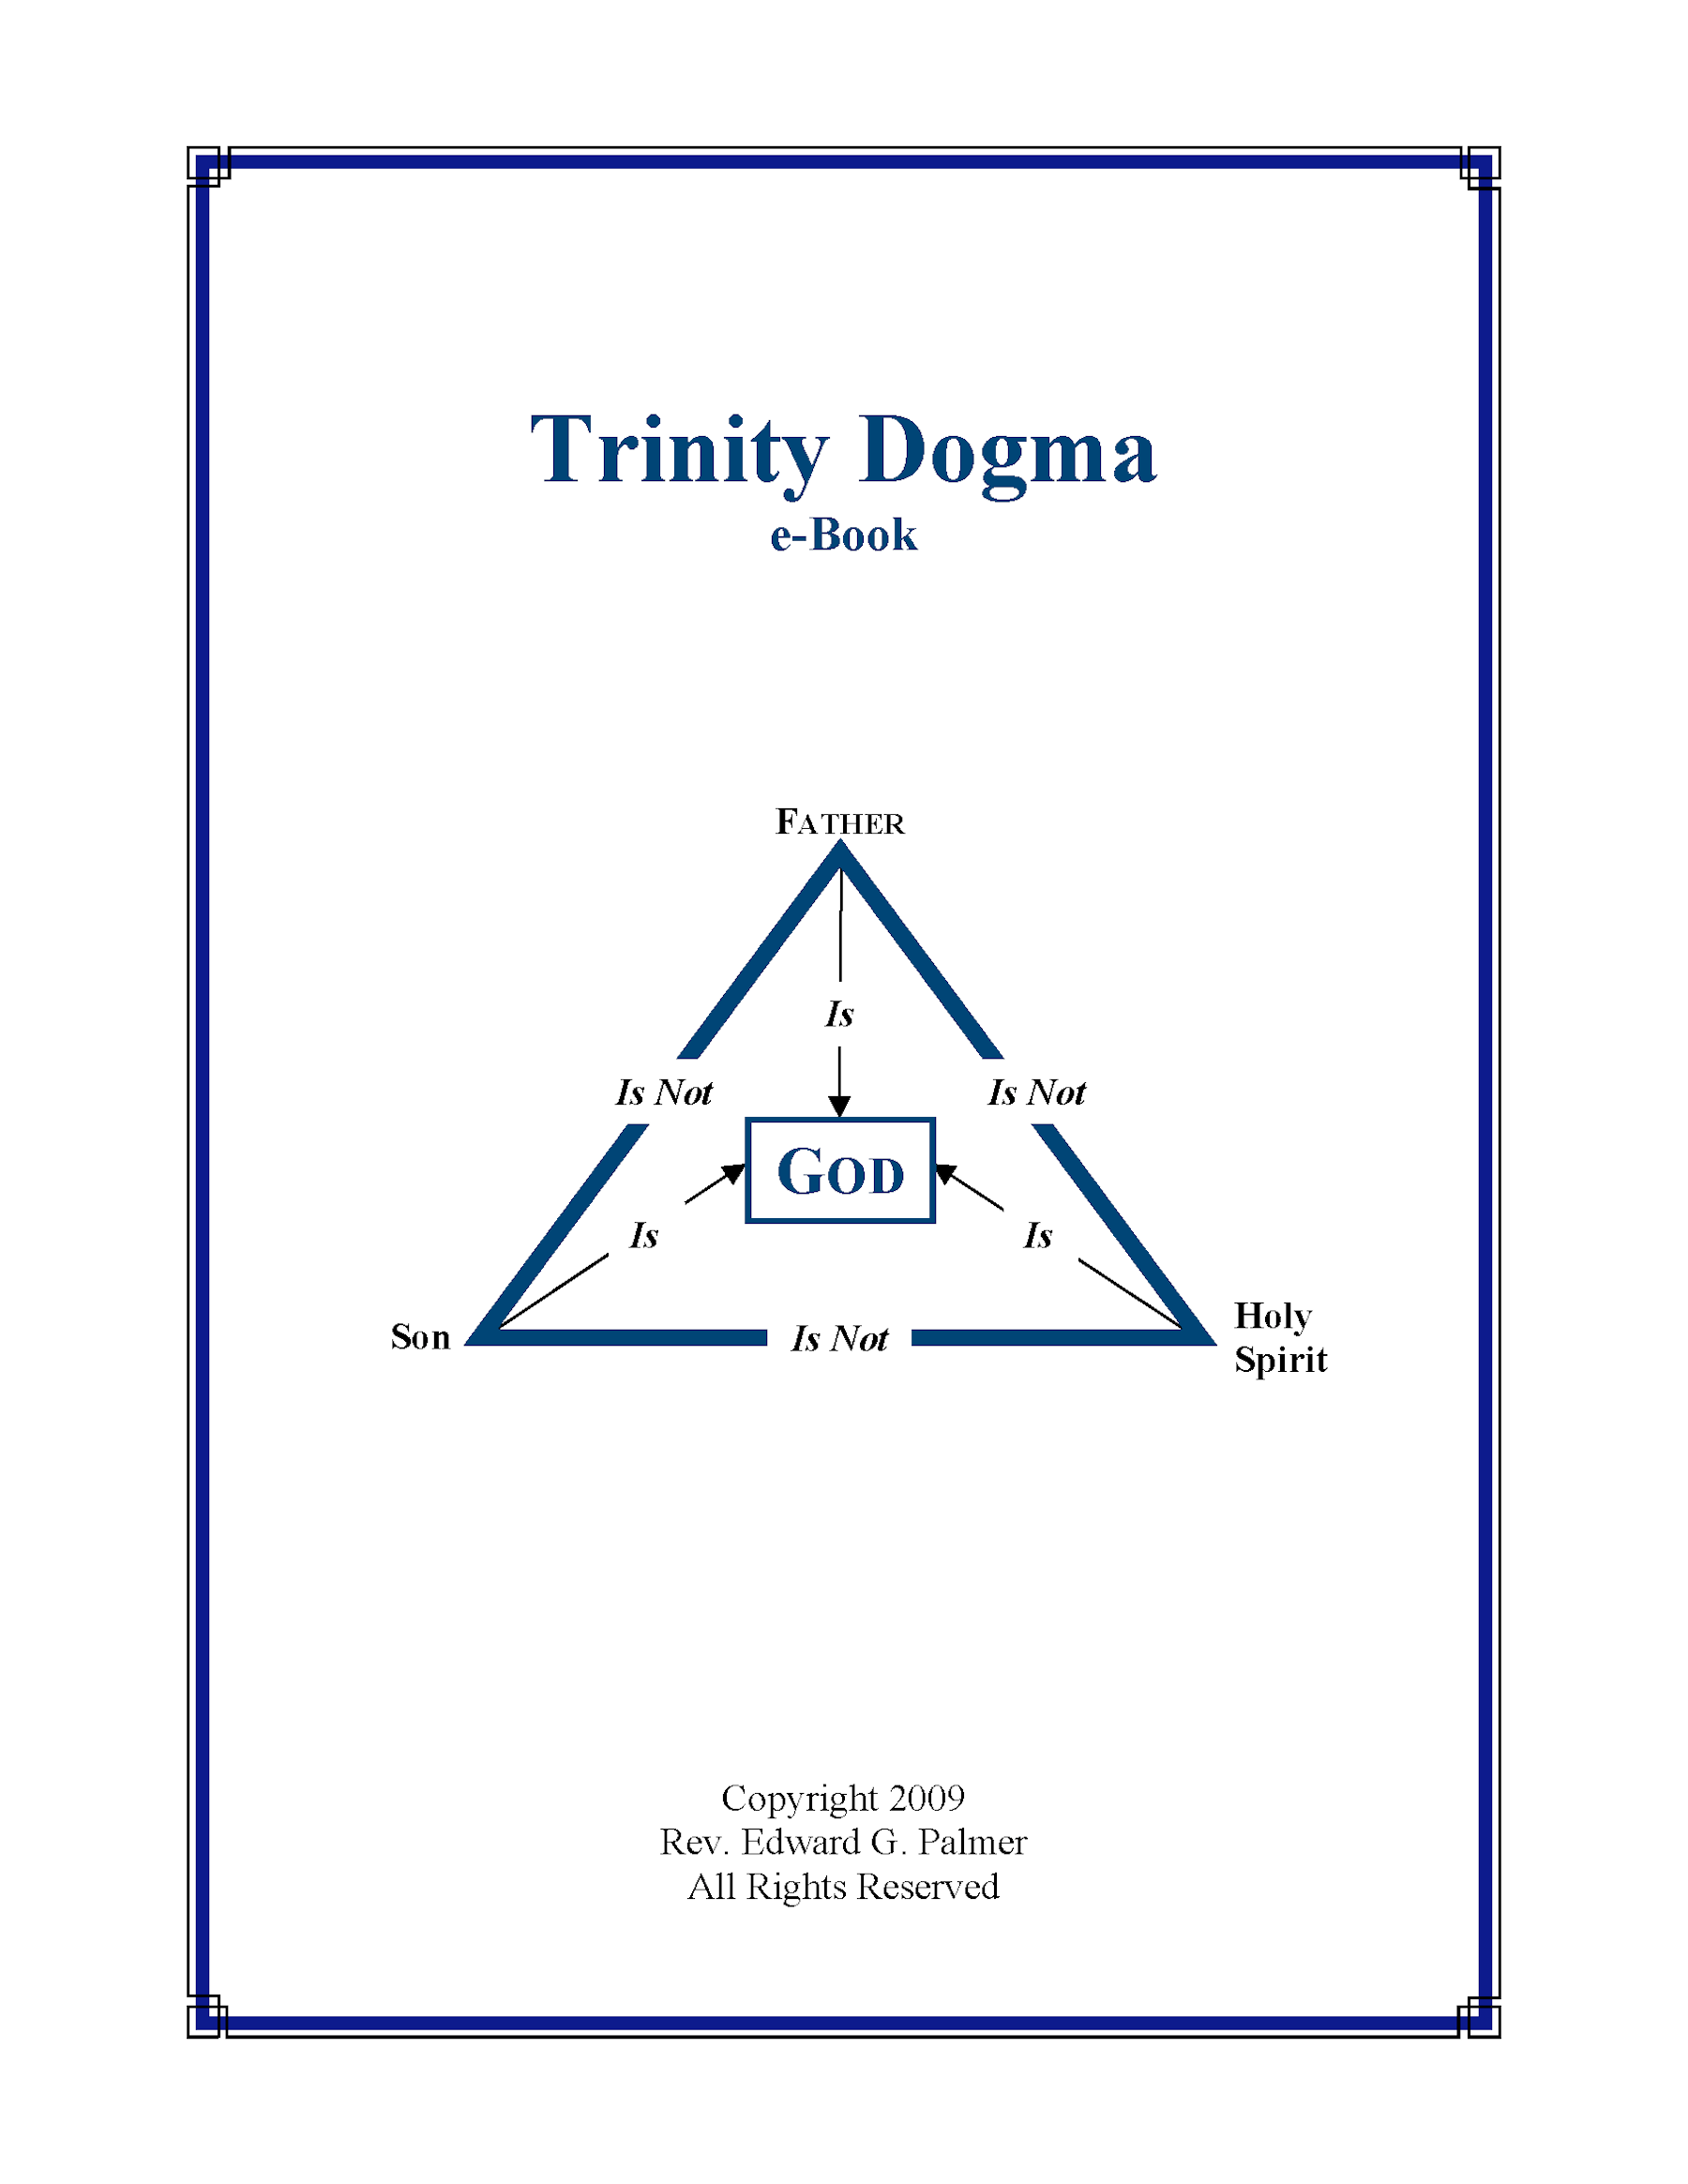 Front cover of TRINITY DOGMA Book